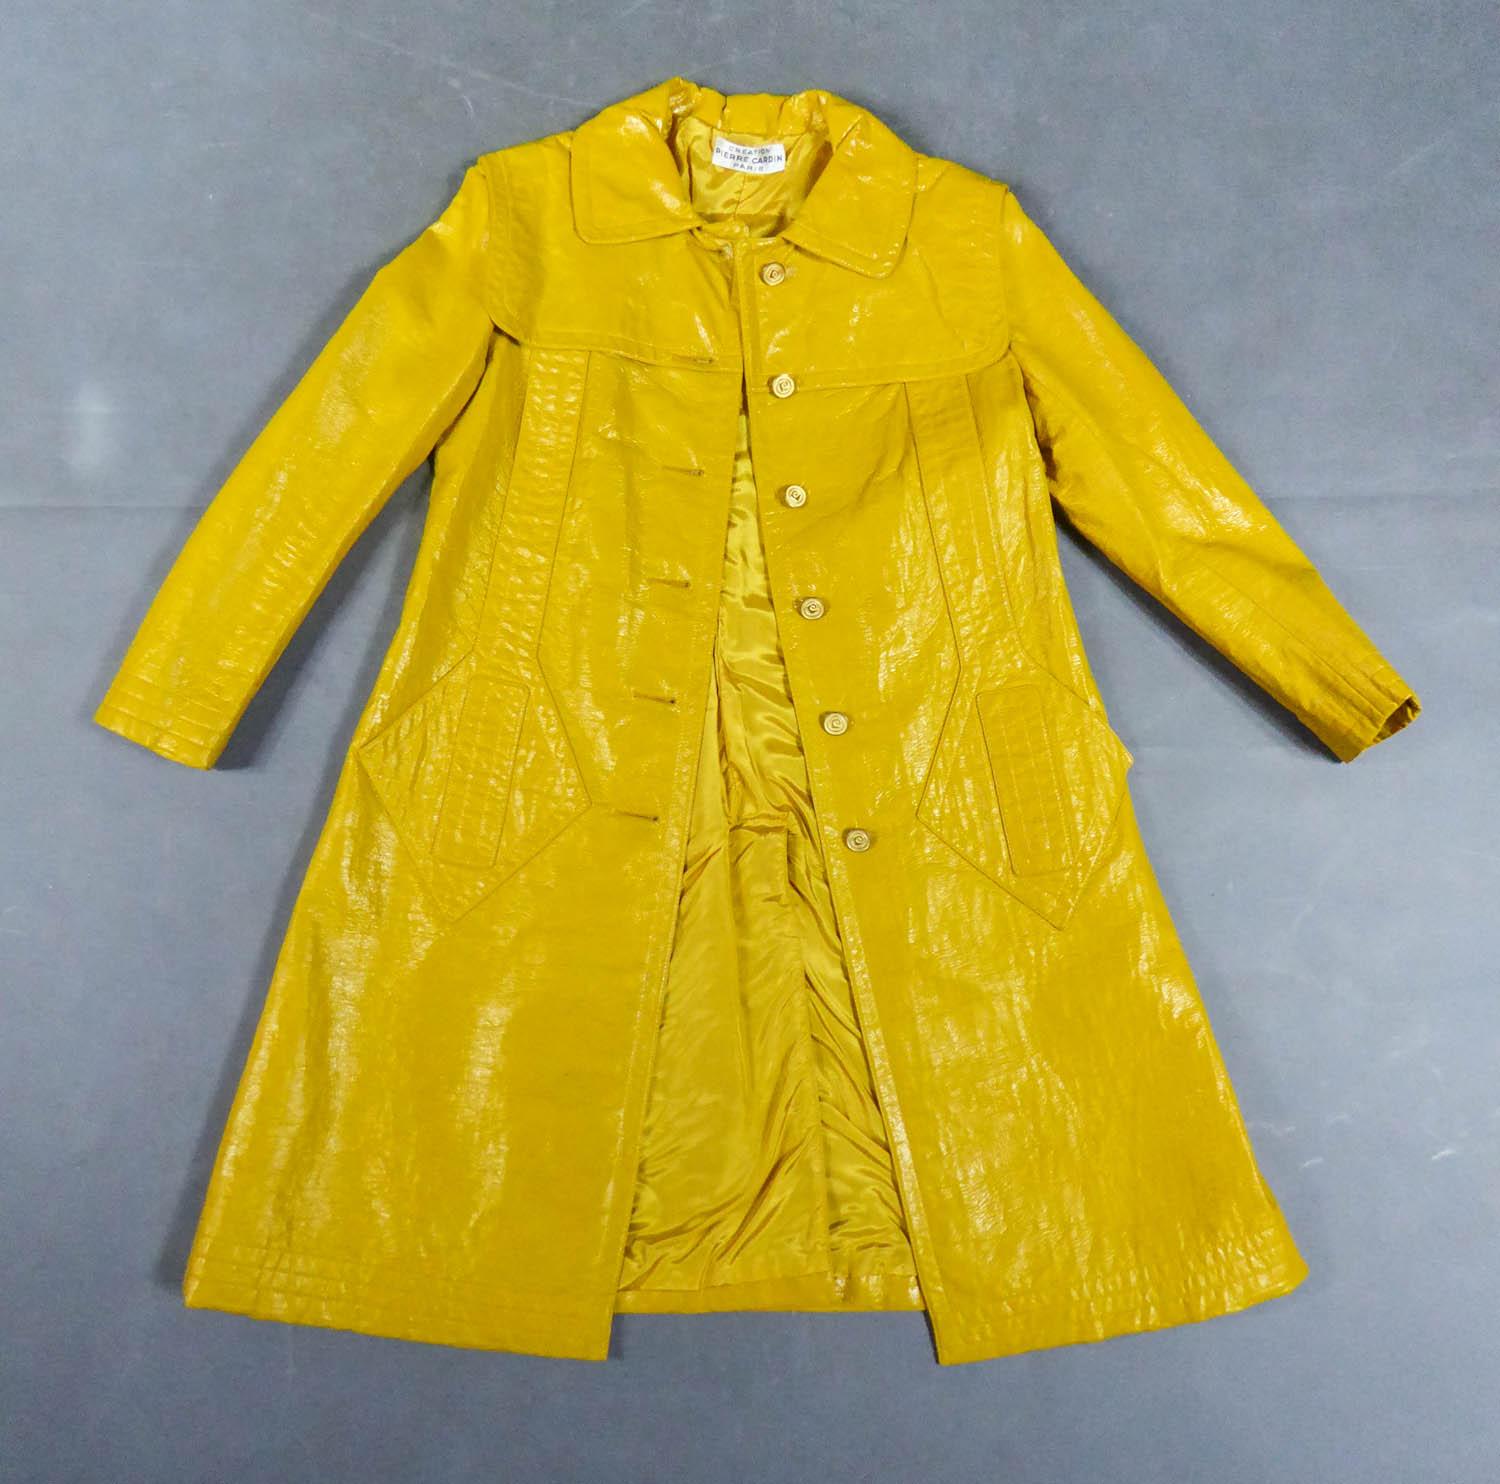 Circa 1970
France

Raincoat in mustard yellow vinyl leatherette by Pierre Cardin from the most modernist period of the famous designer in the early 1970s. Large stitching and appliqué of pocket with geometric diamond pattern on the front. Small